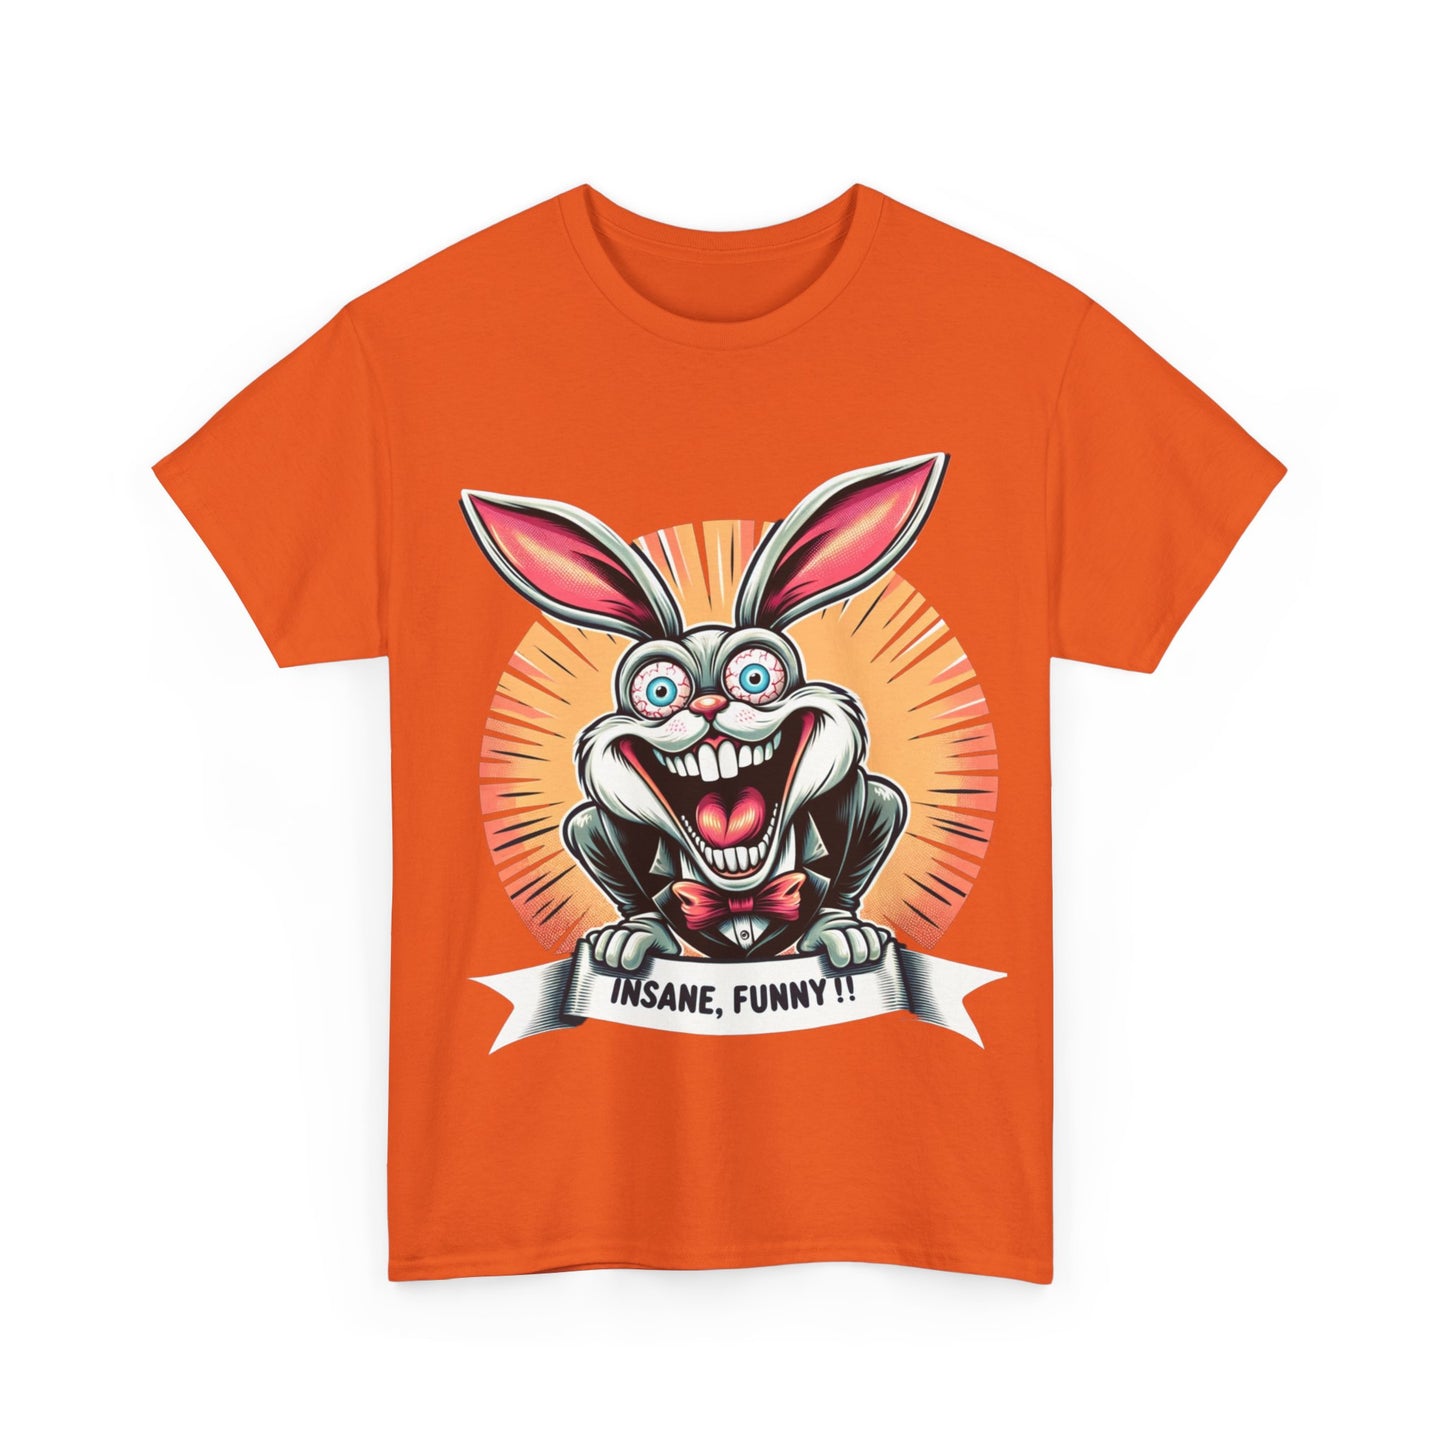 "Insane Funny" Hilarious Bunny Tee – Unleash Creativity & Humor in Your Style!